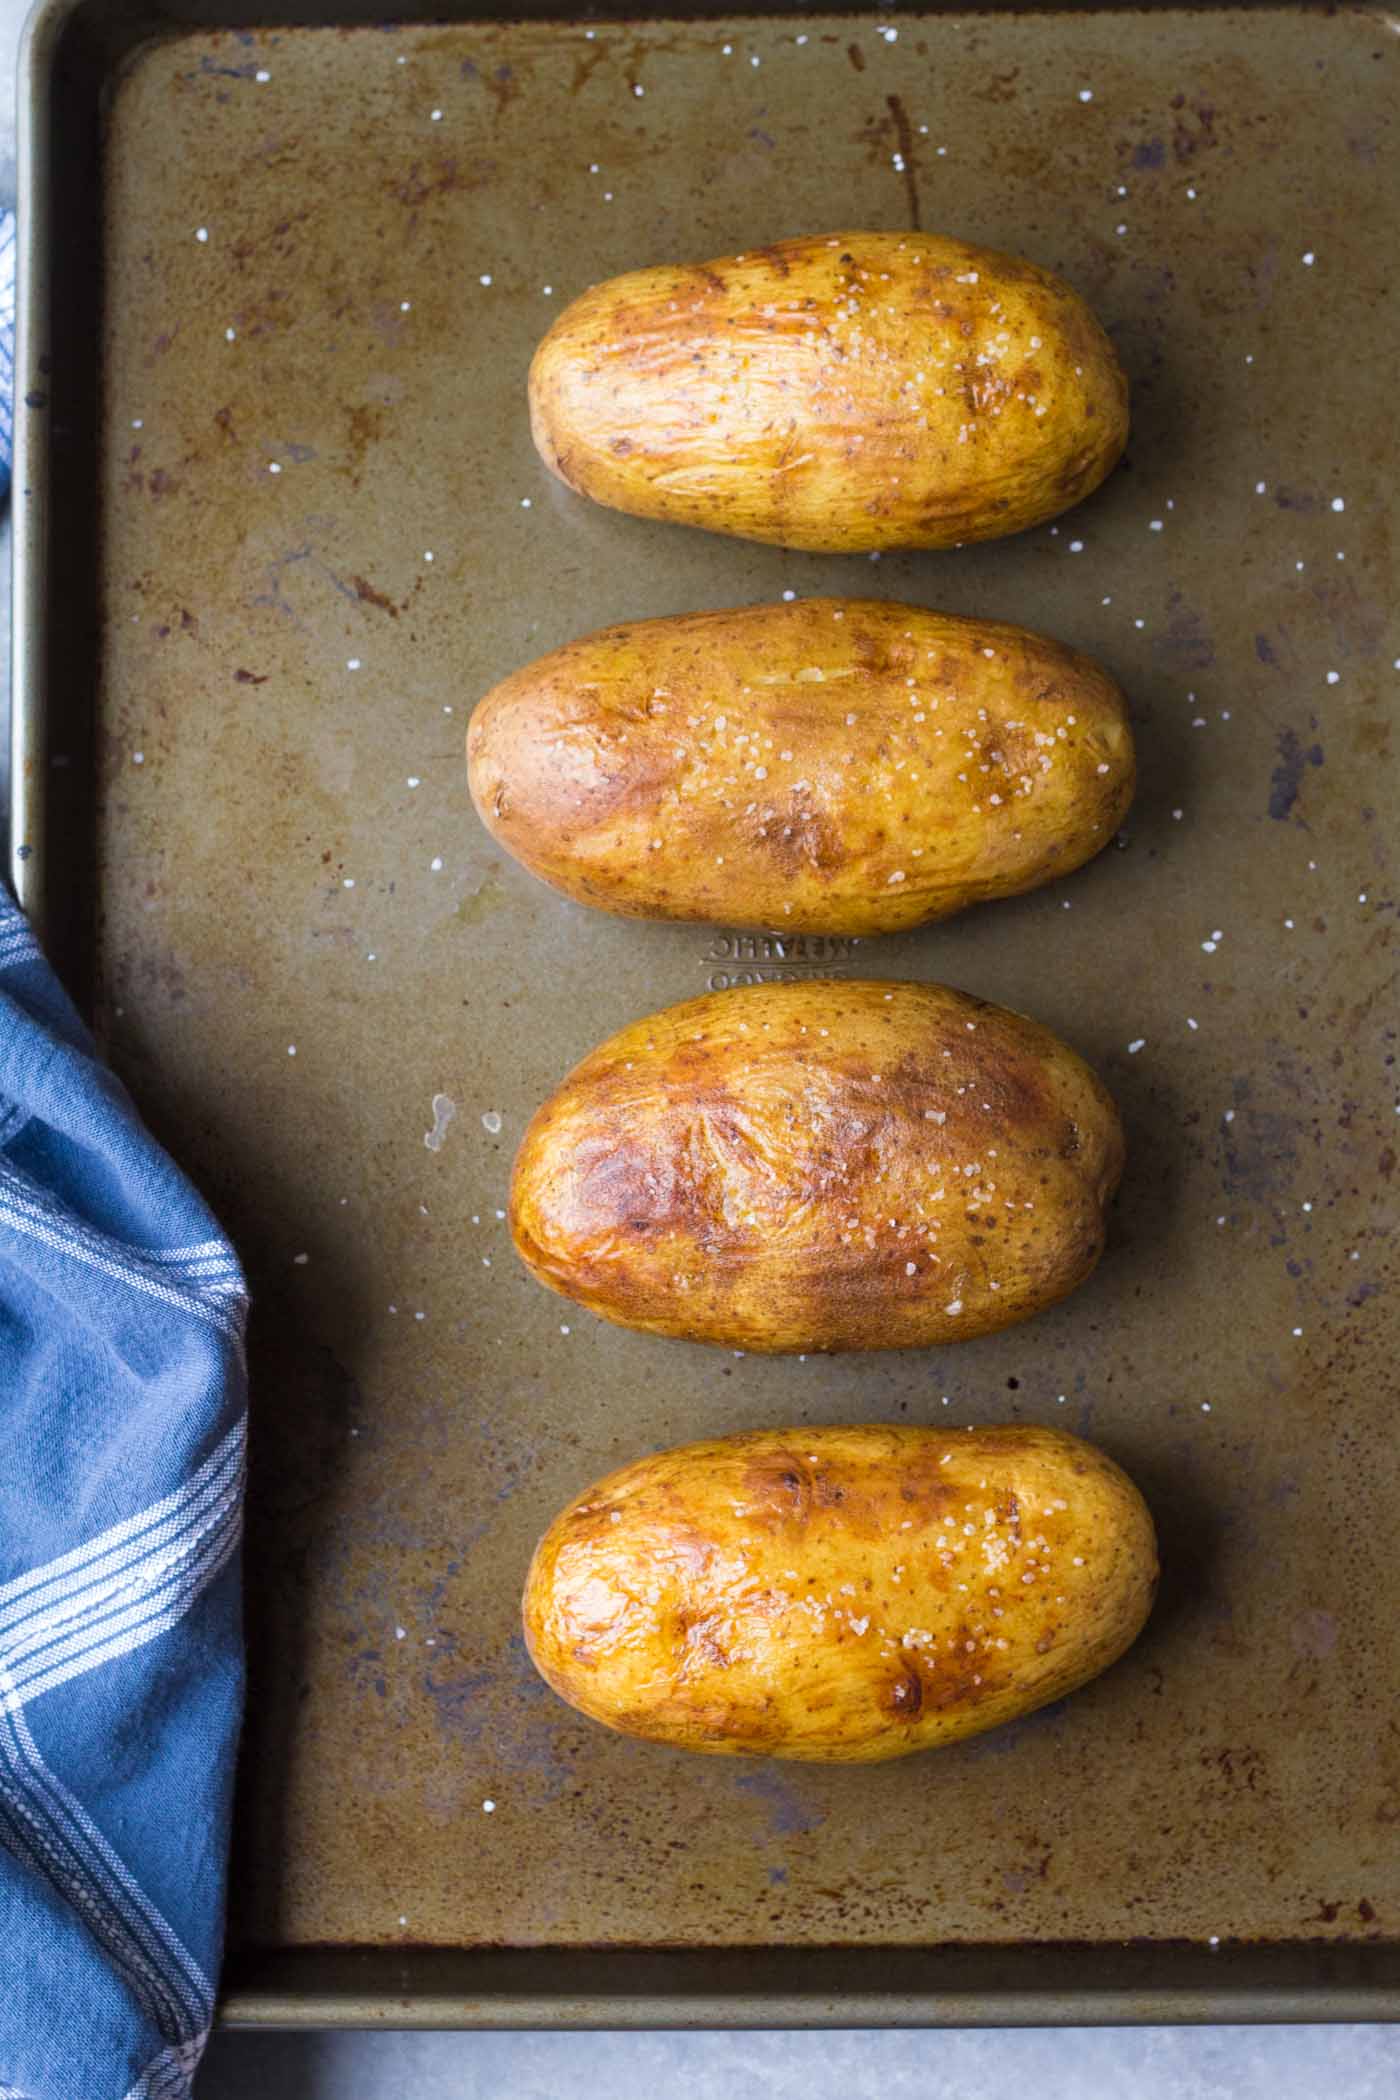 Four instant pot baked potatoes on a baking sheet after crisping in the oven.